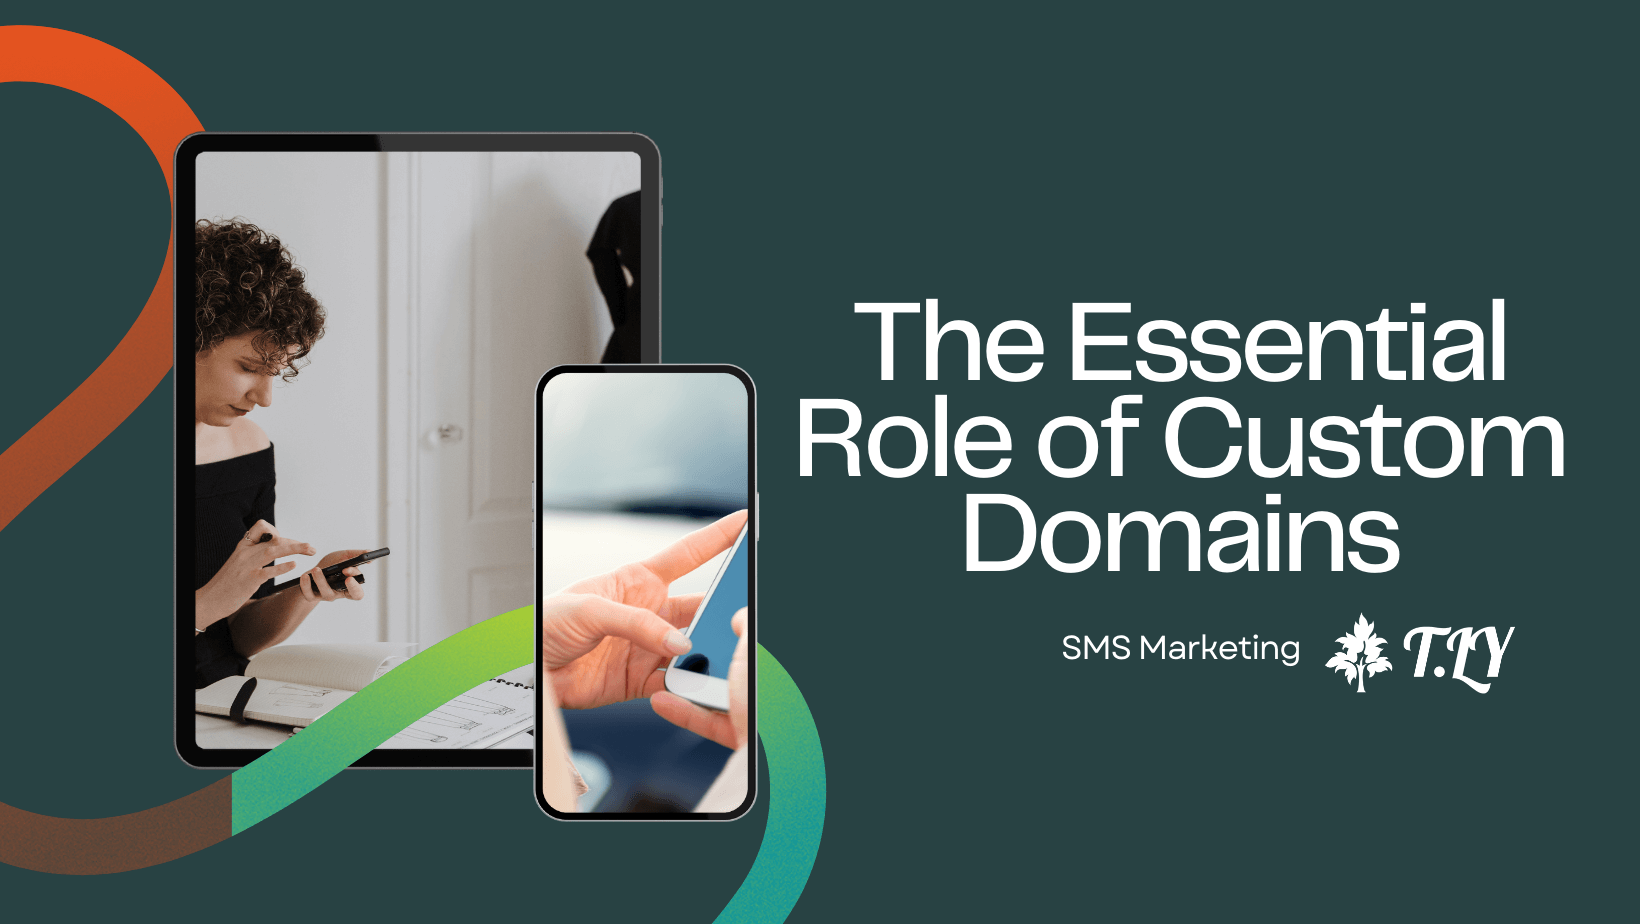 SMS Marketing: The Essential Role of Custom Domains